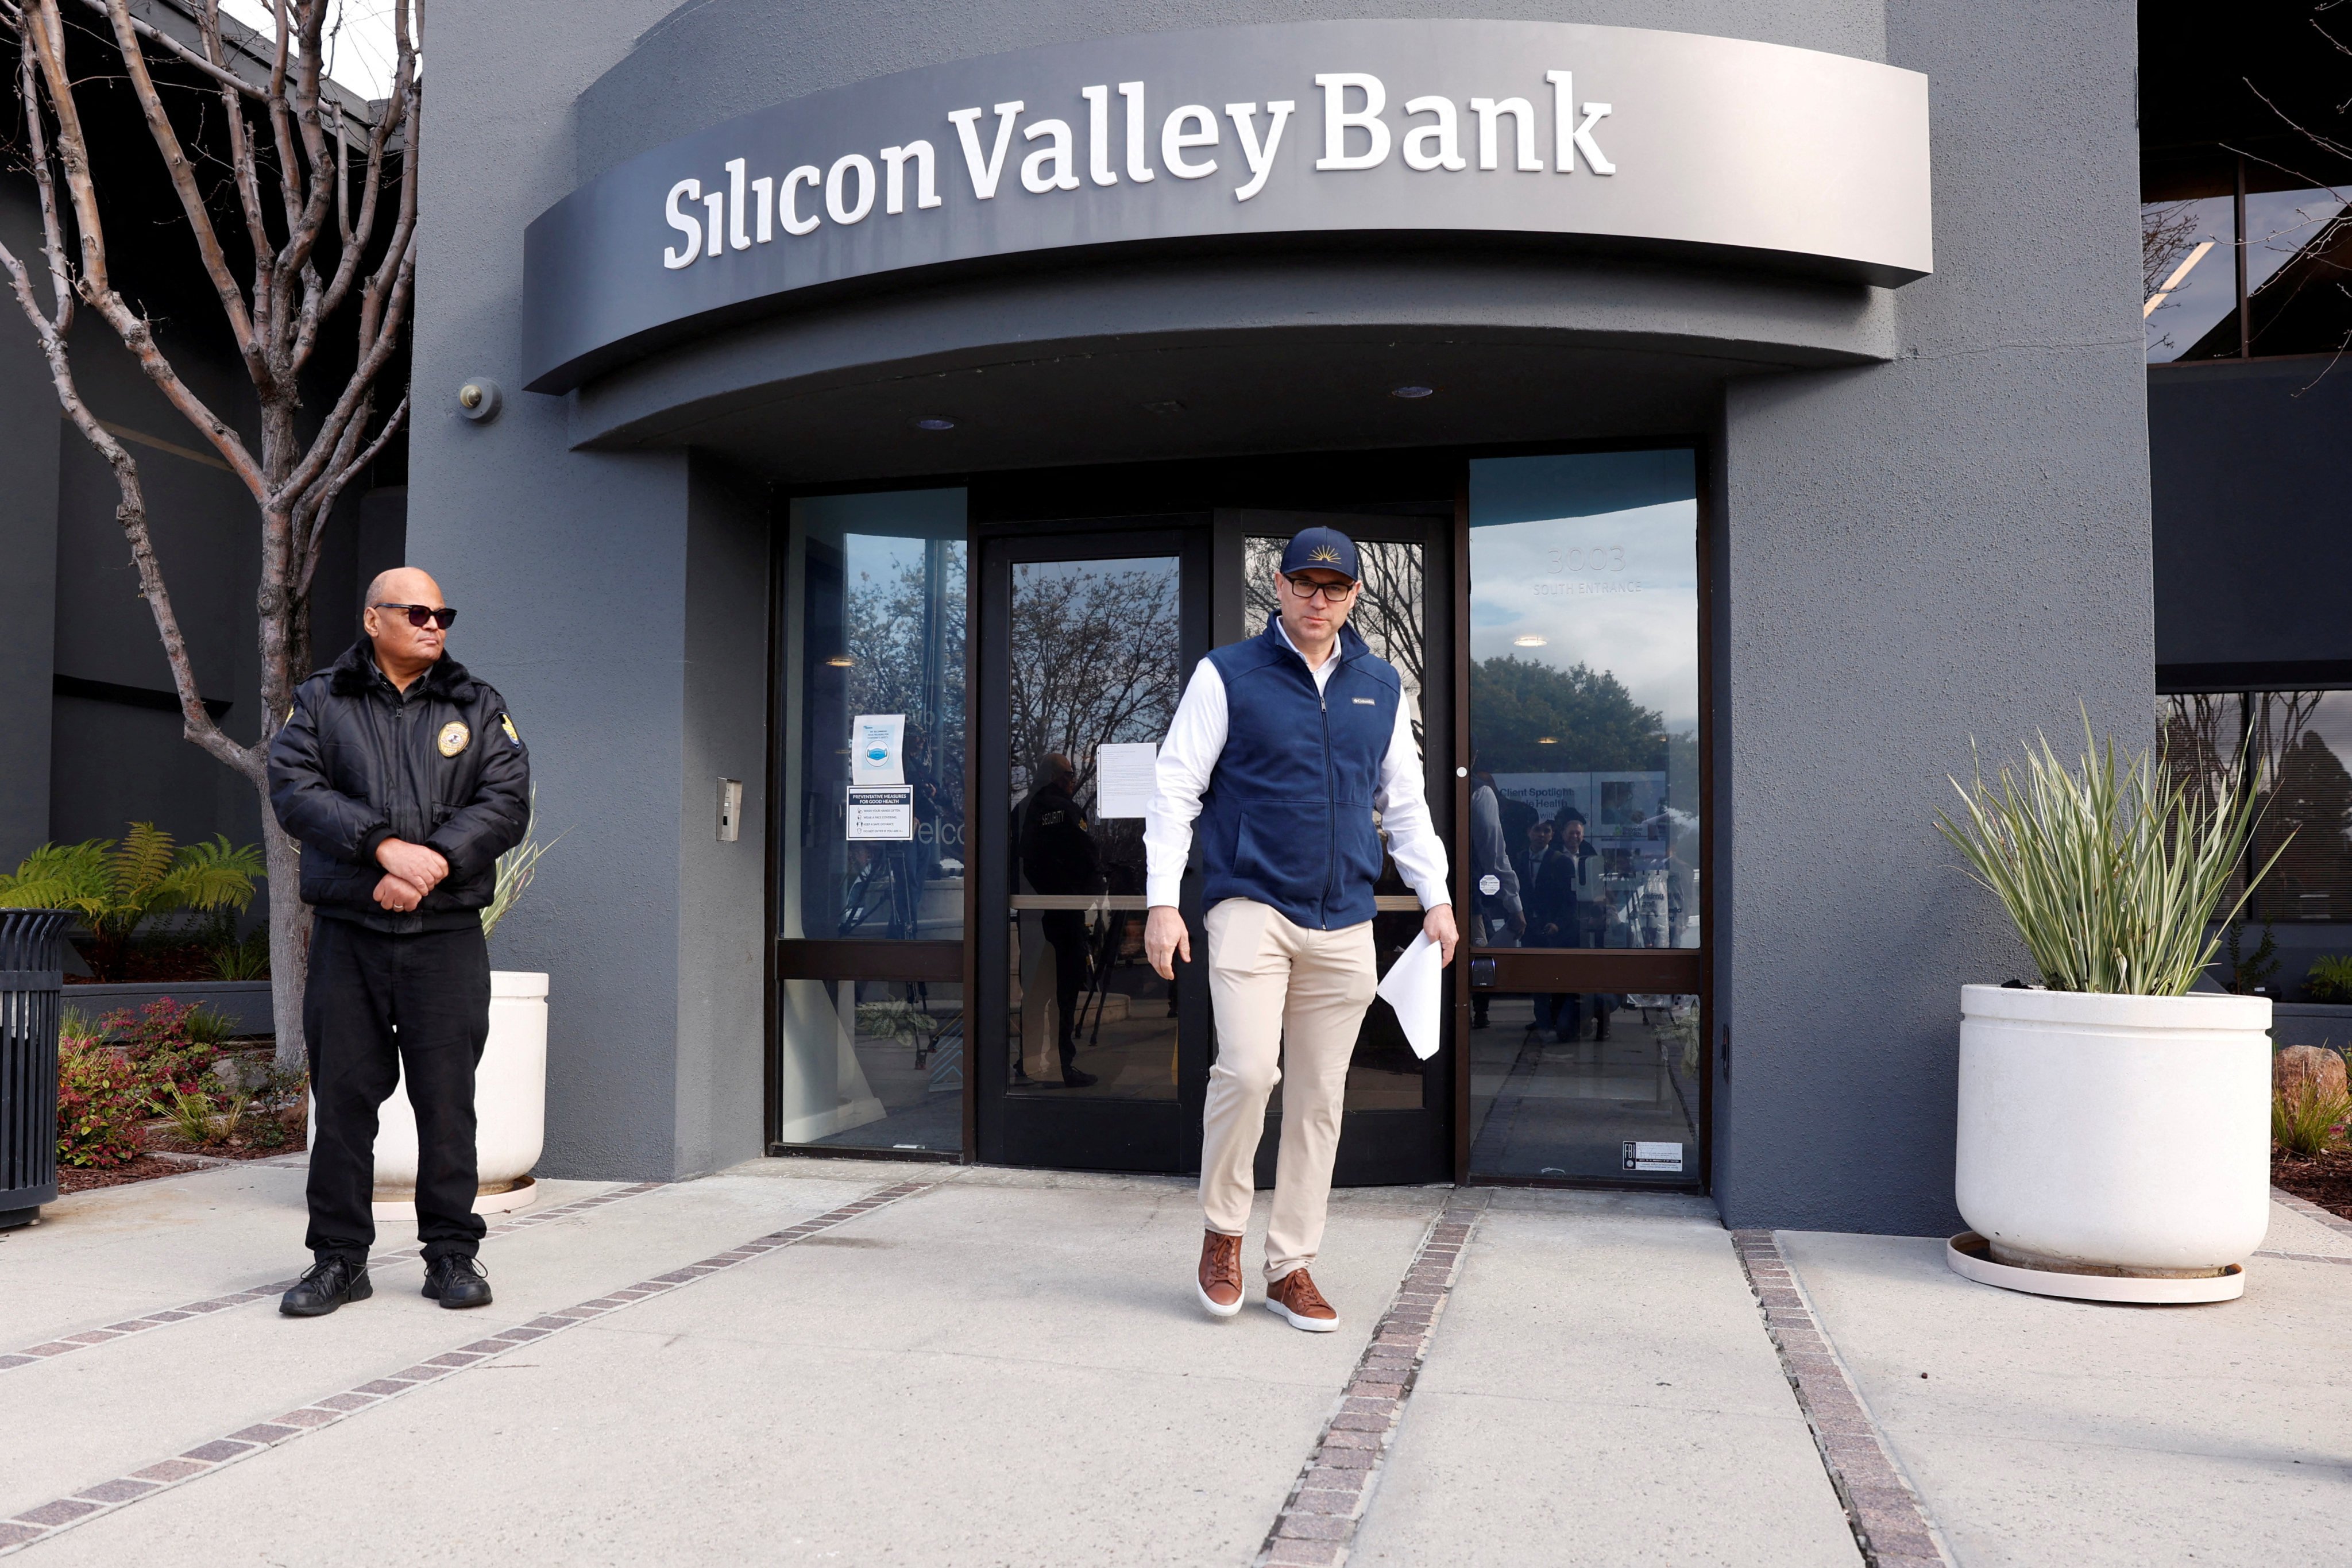 A customer leaves after speaking with FDIC representatives inside of the Silicon Valley Bank headquarters in Santa Clara, California, on March 13. The bank’s collapse earlier this year and the struggles of other regional banks that followed have raised concerns that global financial stability is not what it should be. Photo: Reuters